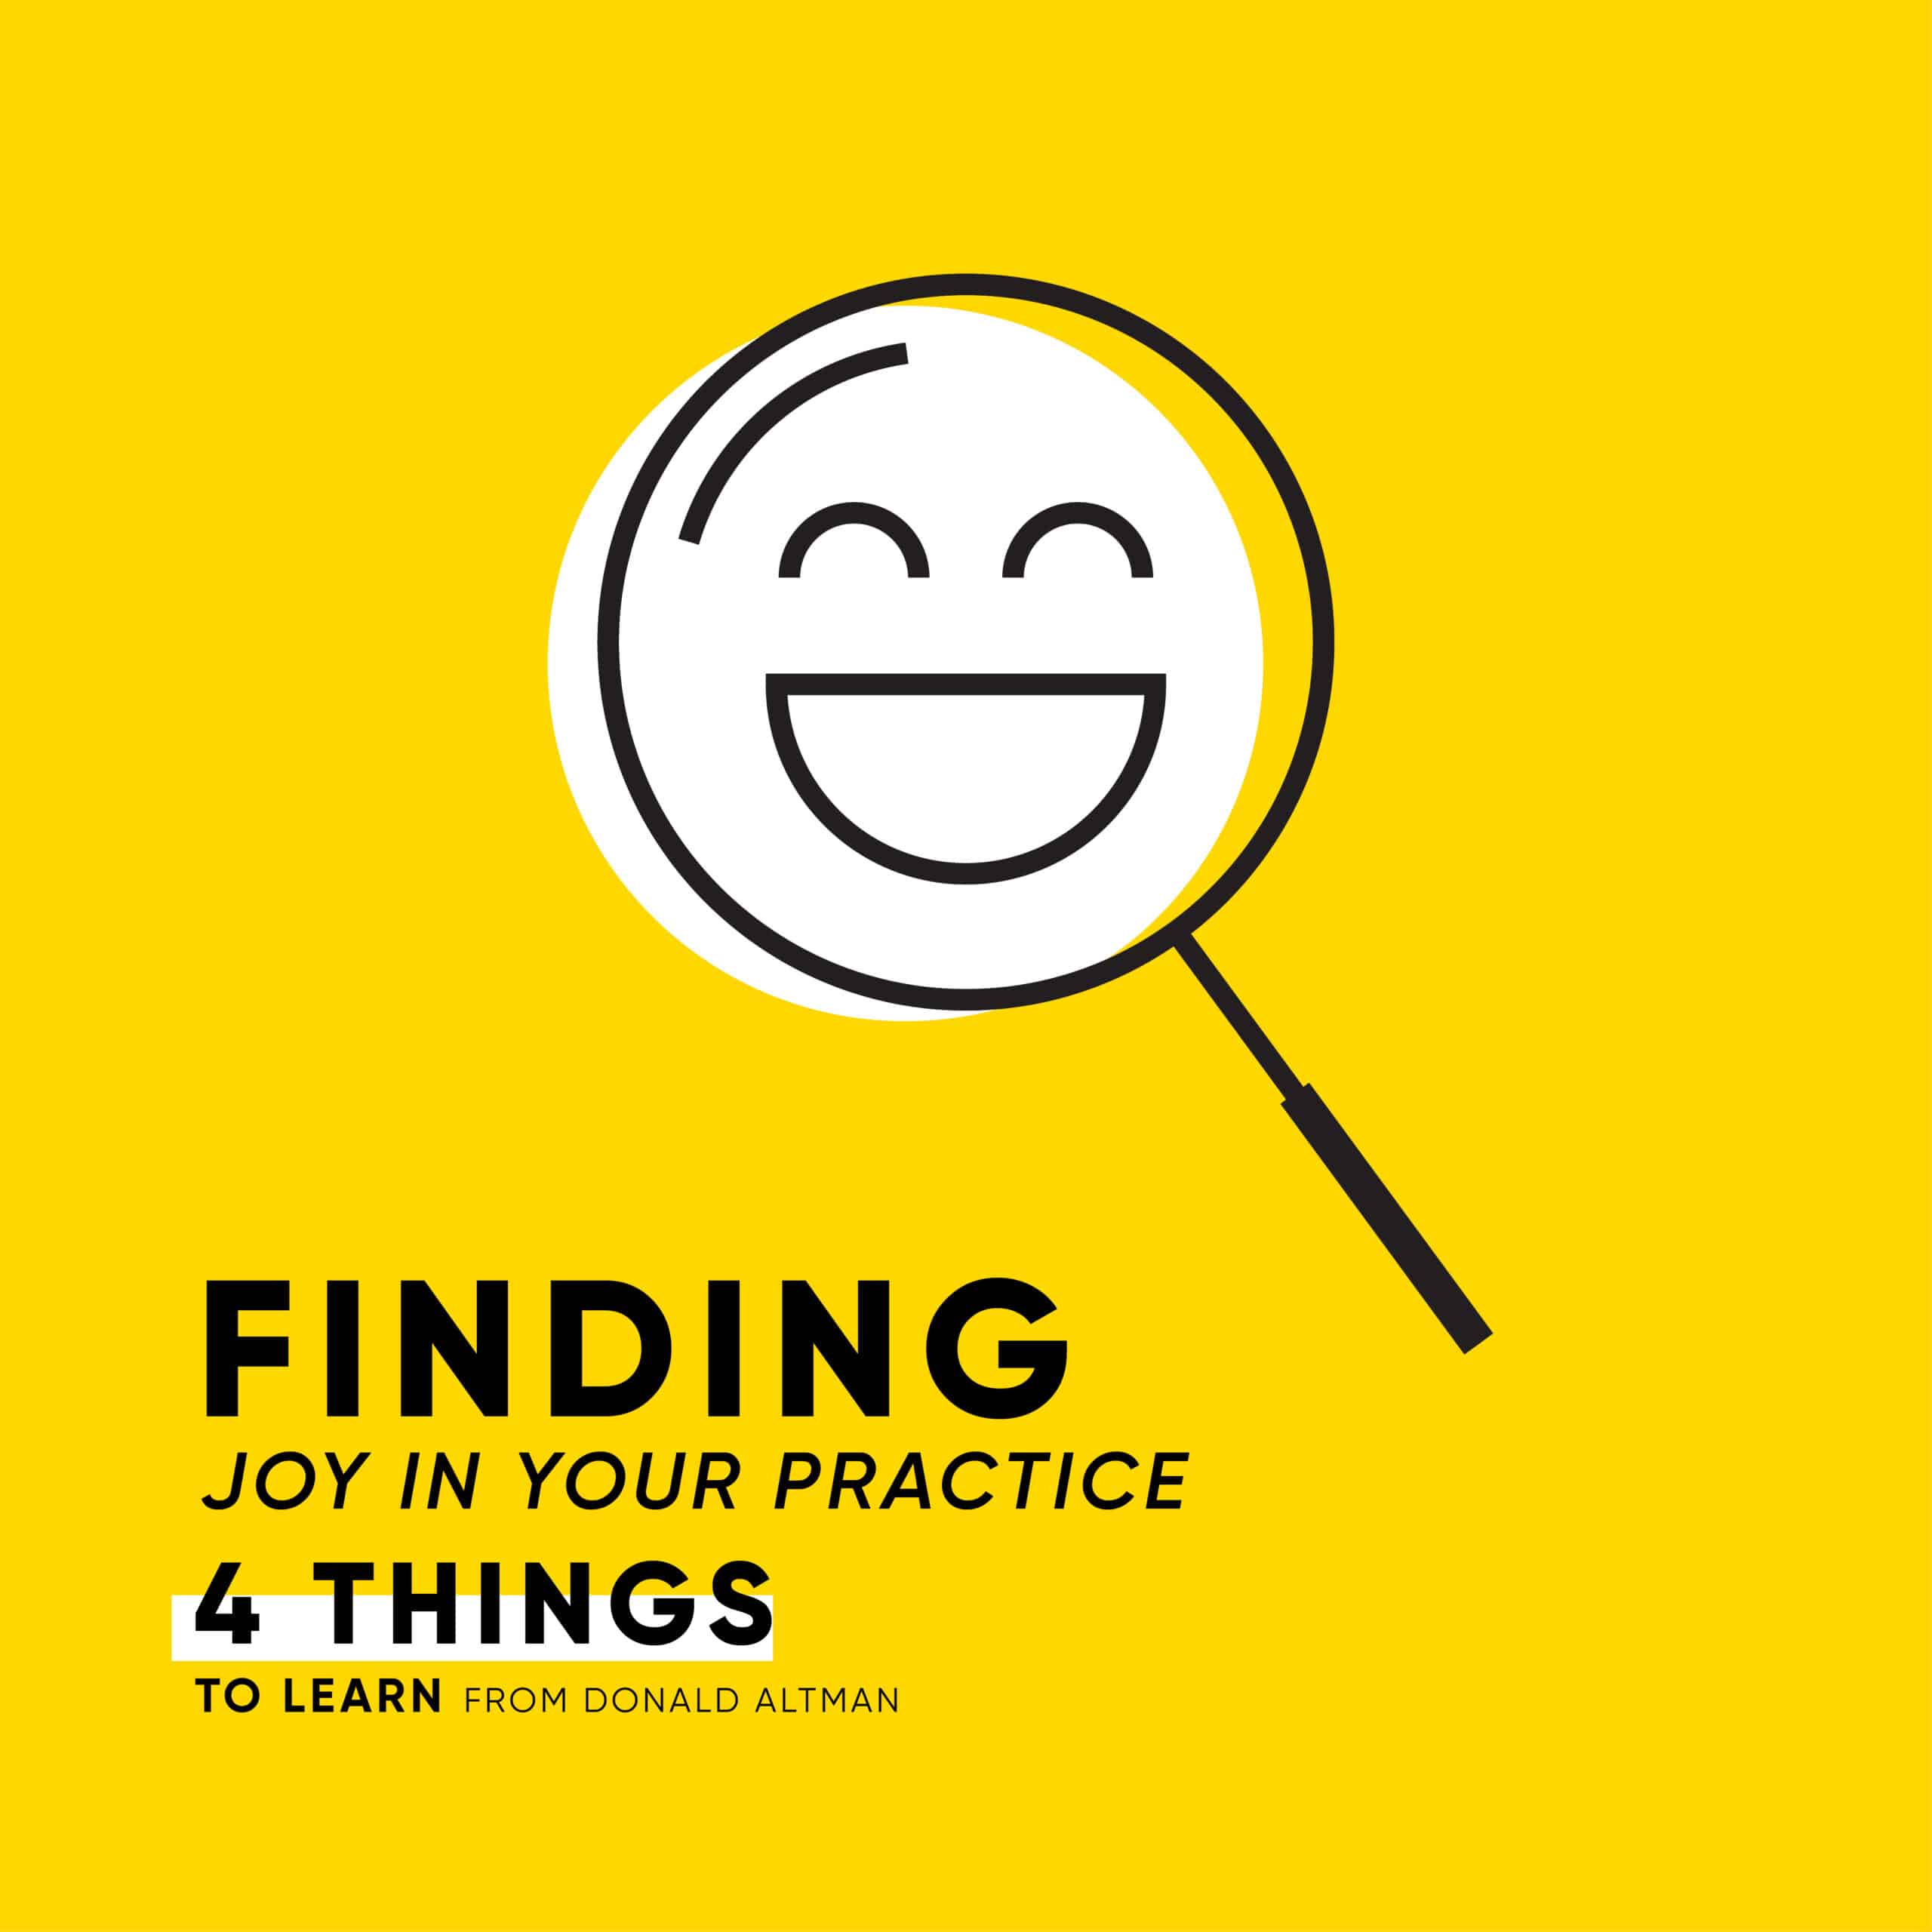 Finding Joy in Your Practice: 4 Things to Learn from Donald Altman